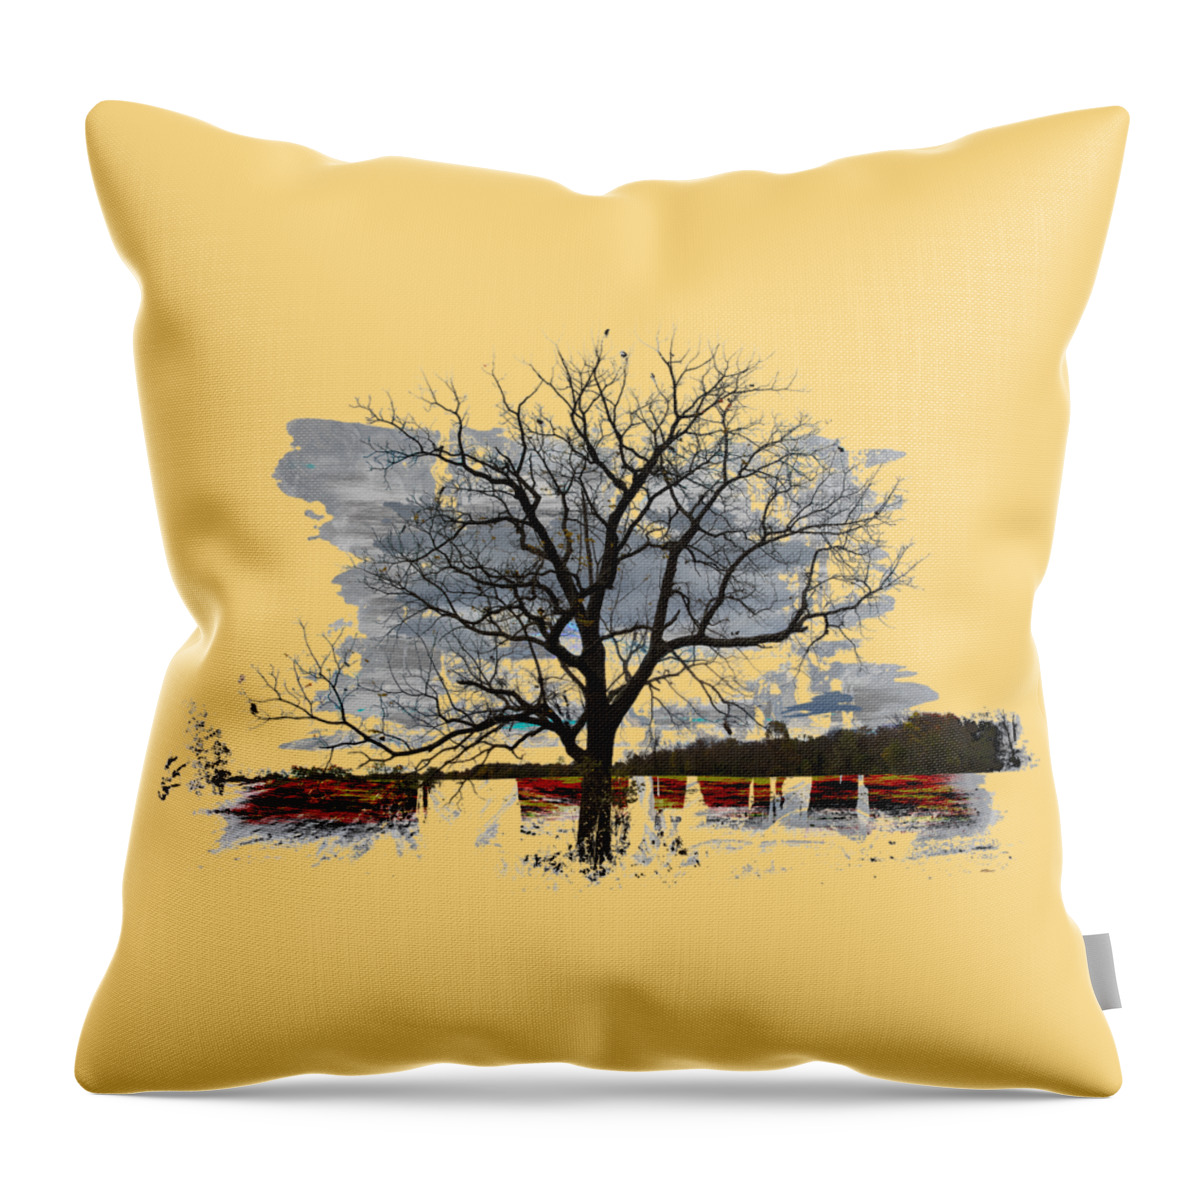 Apparel Throw Pillow featuring the photograph On To Beginnings by John M Bailey